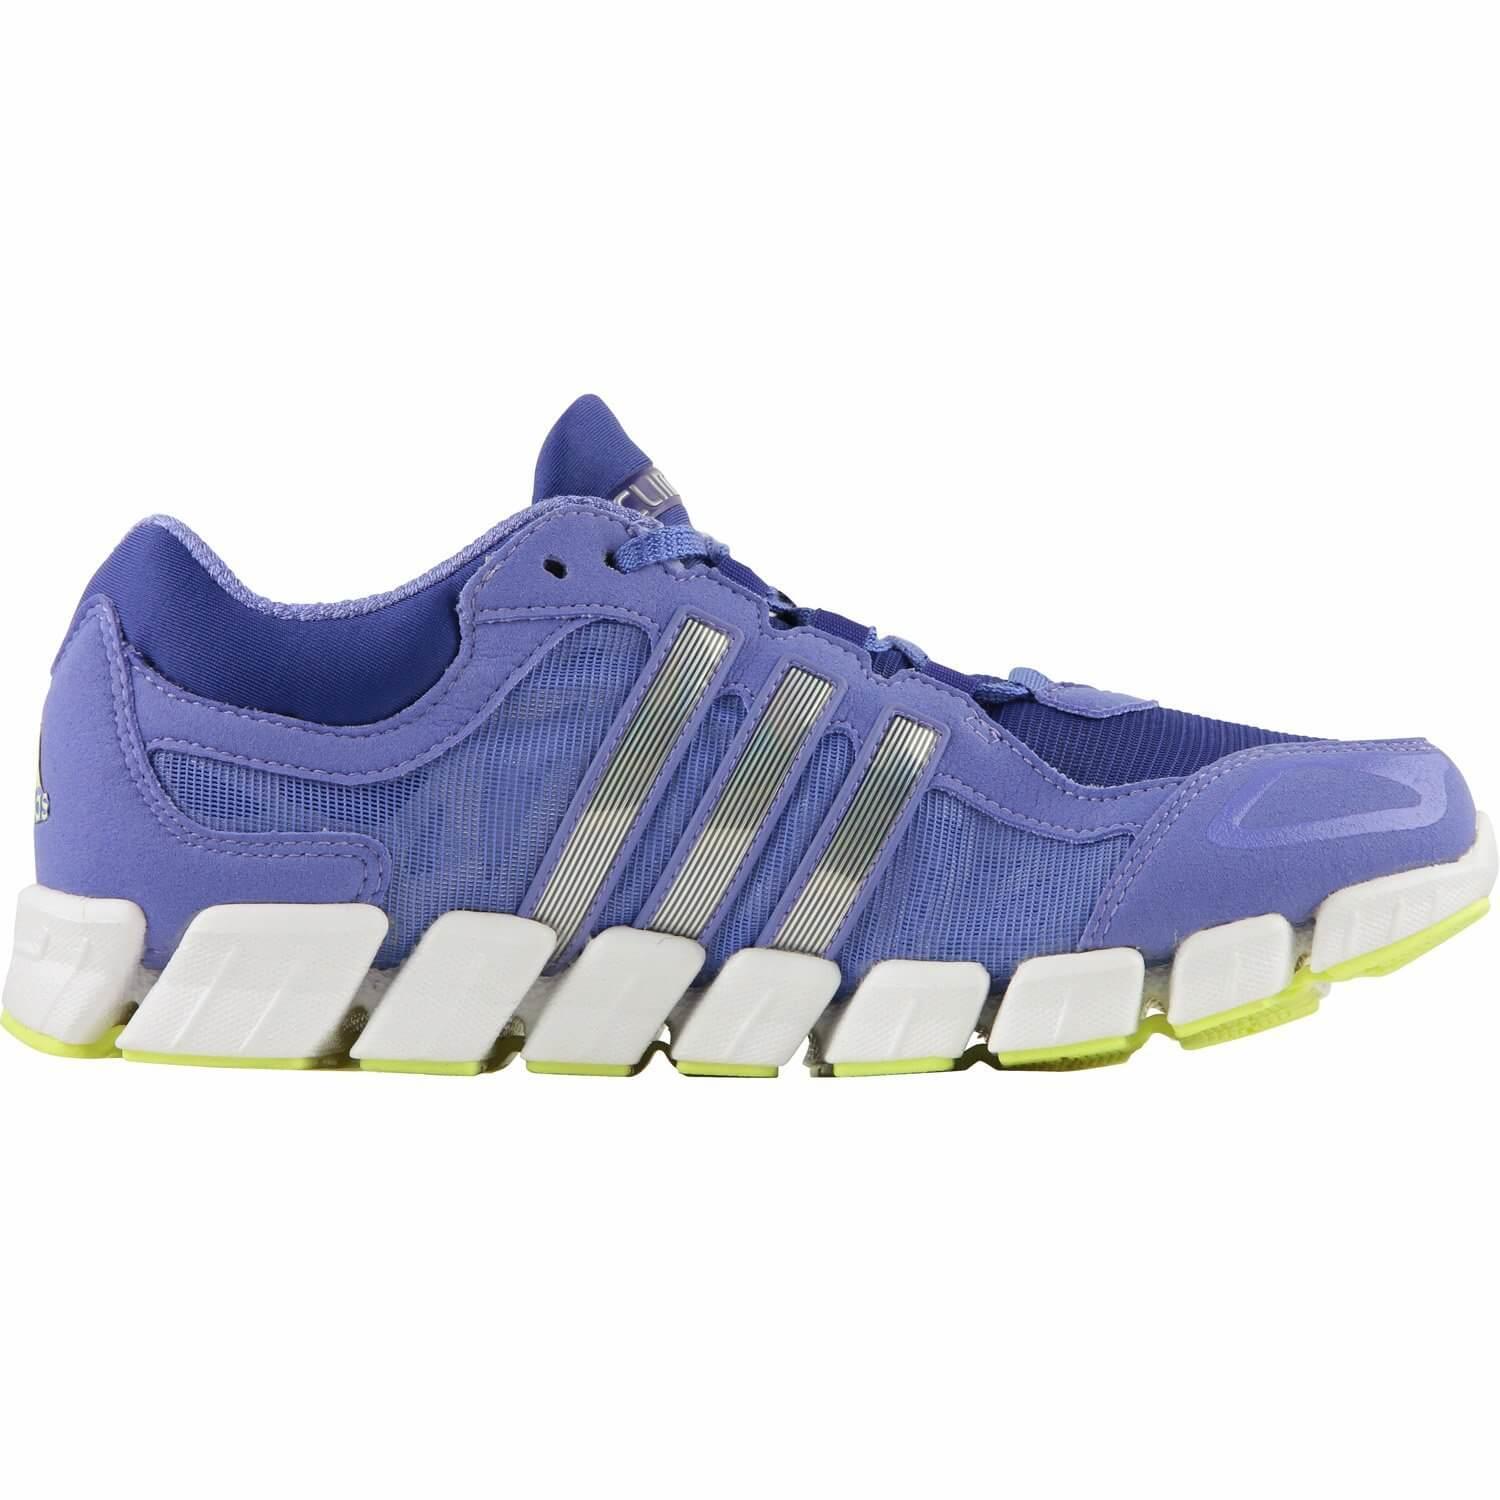 A cushioned and flexible midsole promote a natural stride while wearing the Adidas Climacool Freshride